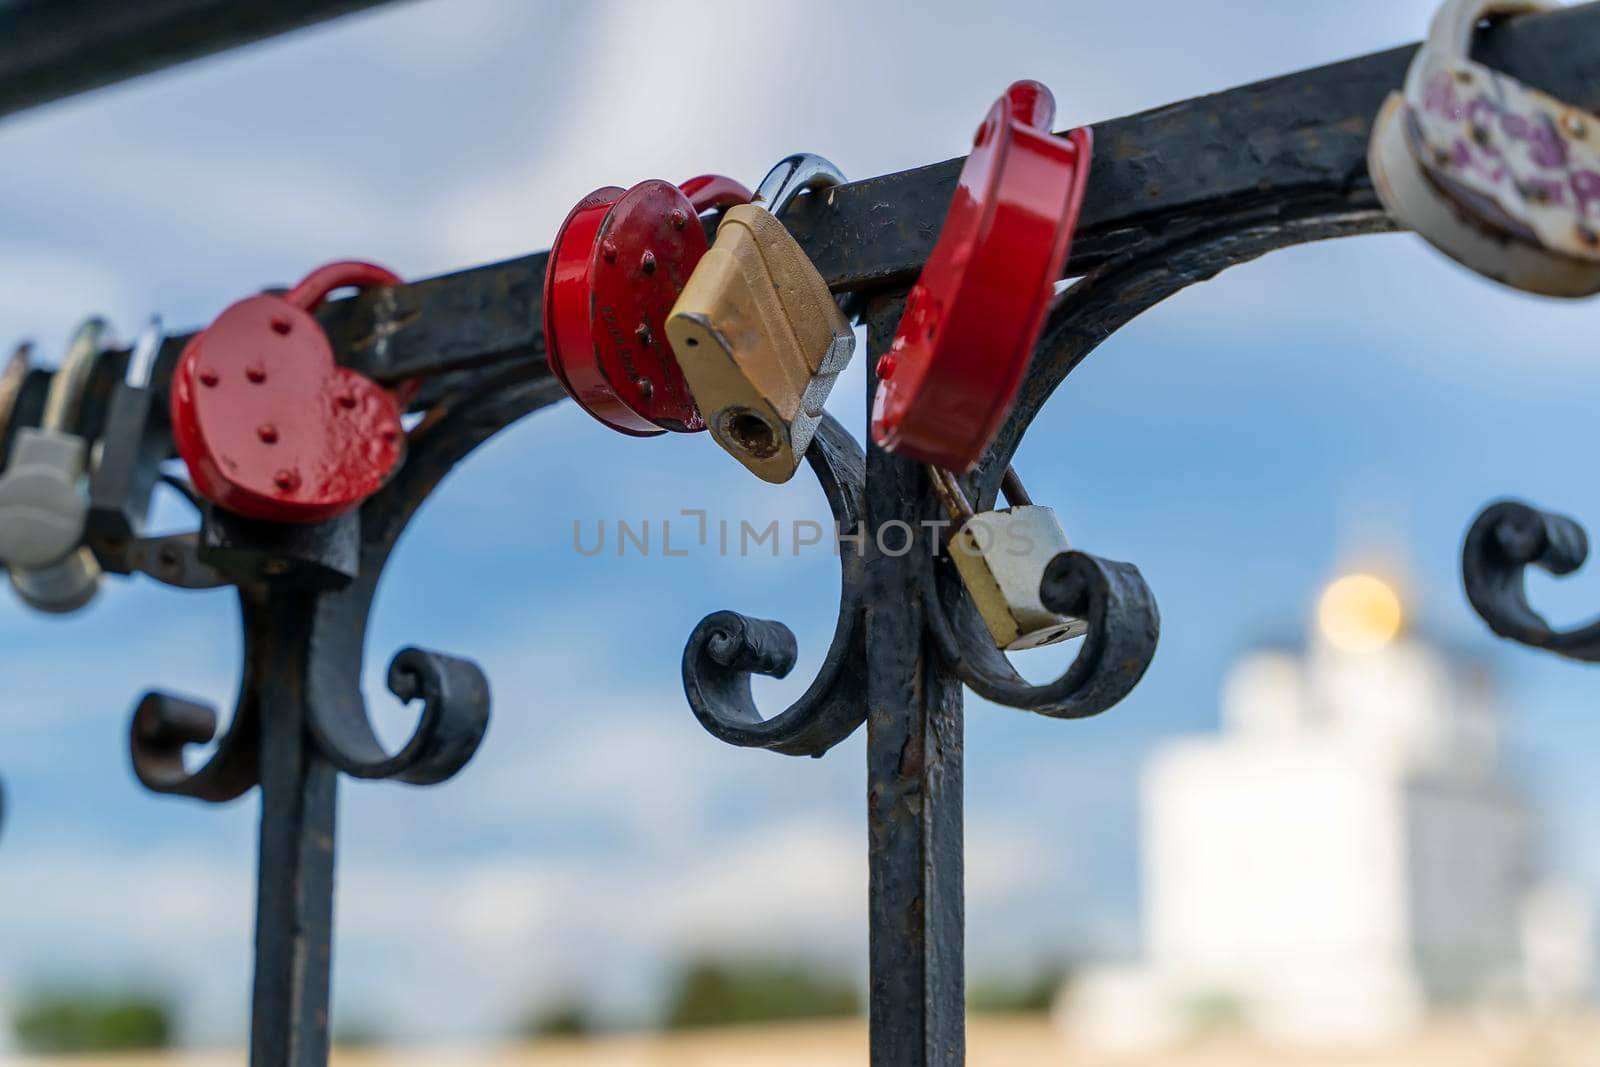 locks for luck on the bridge. A tradition Wedding locks for good luck. Binding of marital ties. Love locks concept. The railing of the bridge with love locks. The oath of the newlyweds in loyalty and love